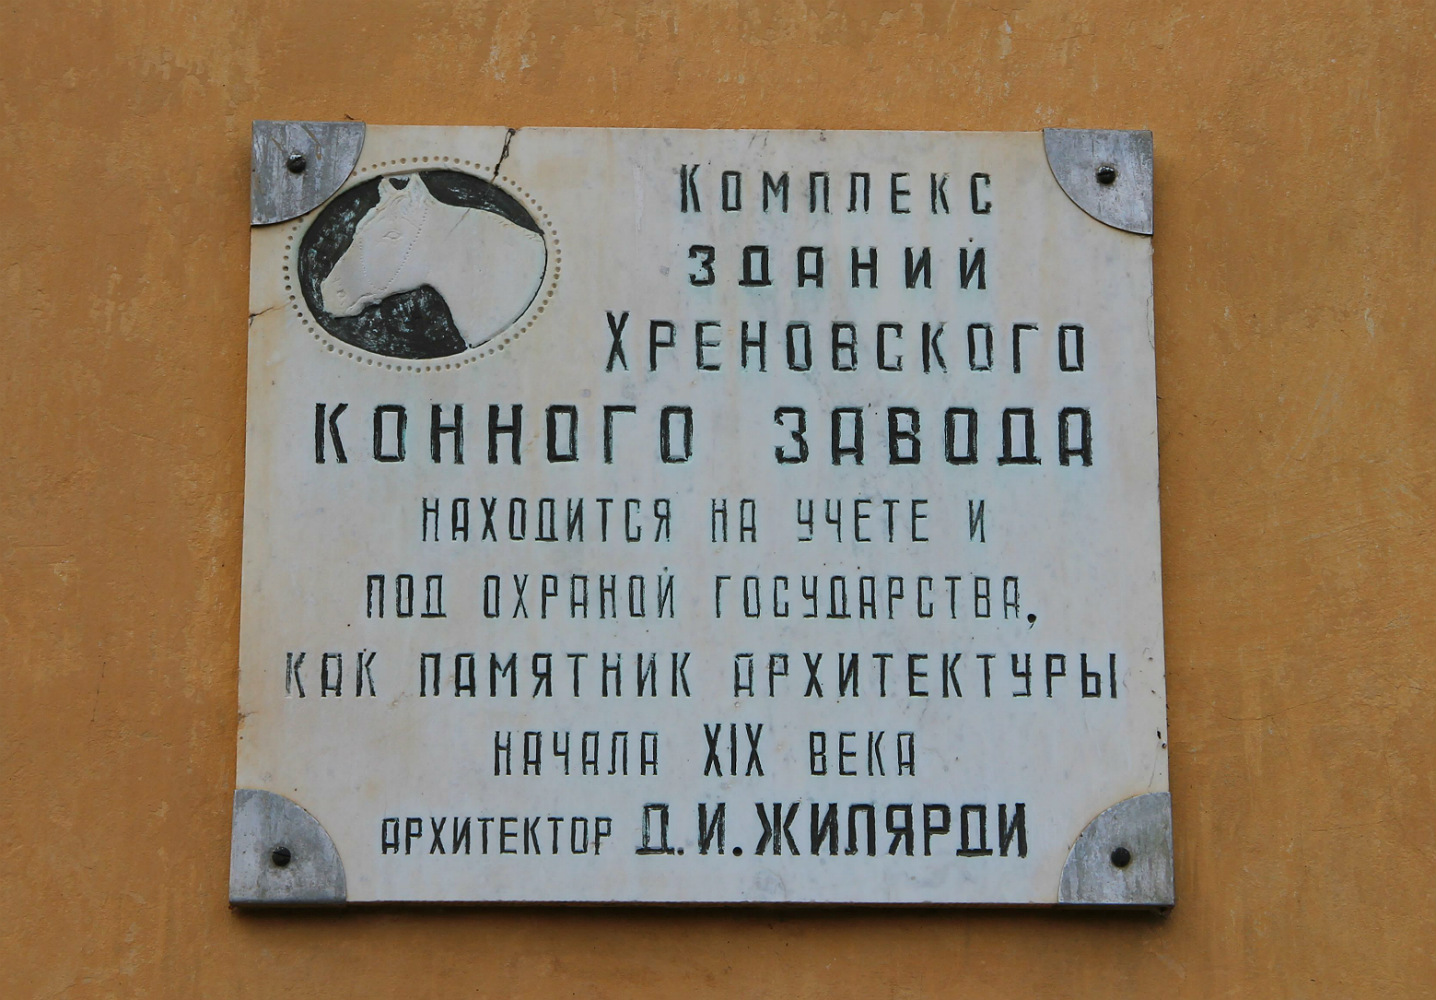 Bobrov District, other localities, с. Слобода, Центральная усадьба конного завода, 22. Bobrov District, other localities — Memorial plaques